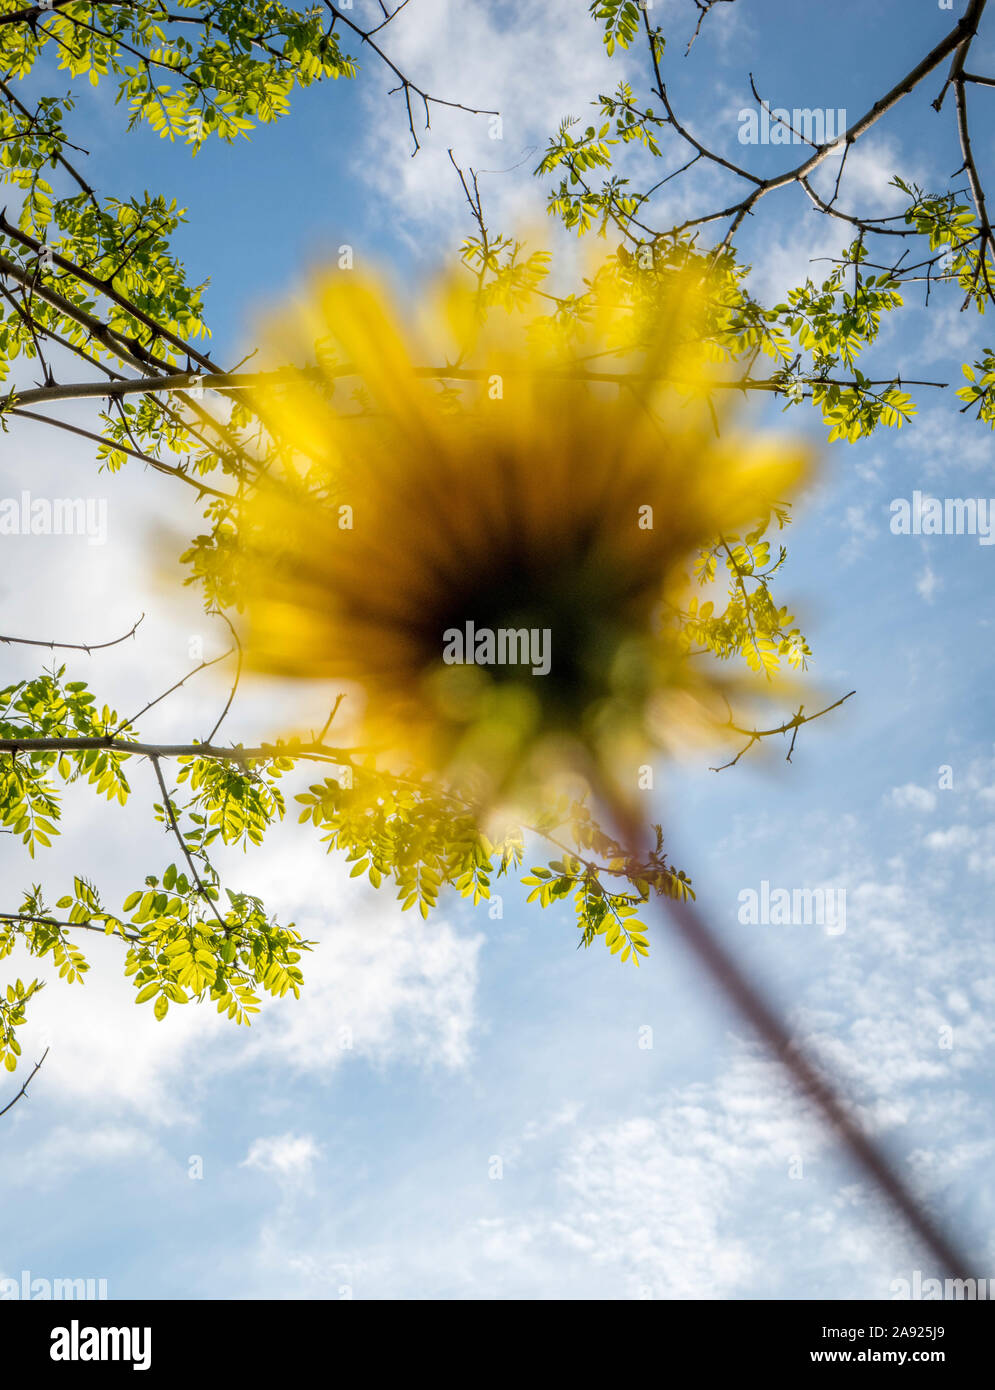 dandelion blurred with a tree background Stock Photo